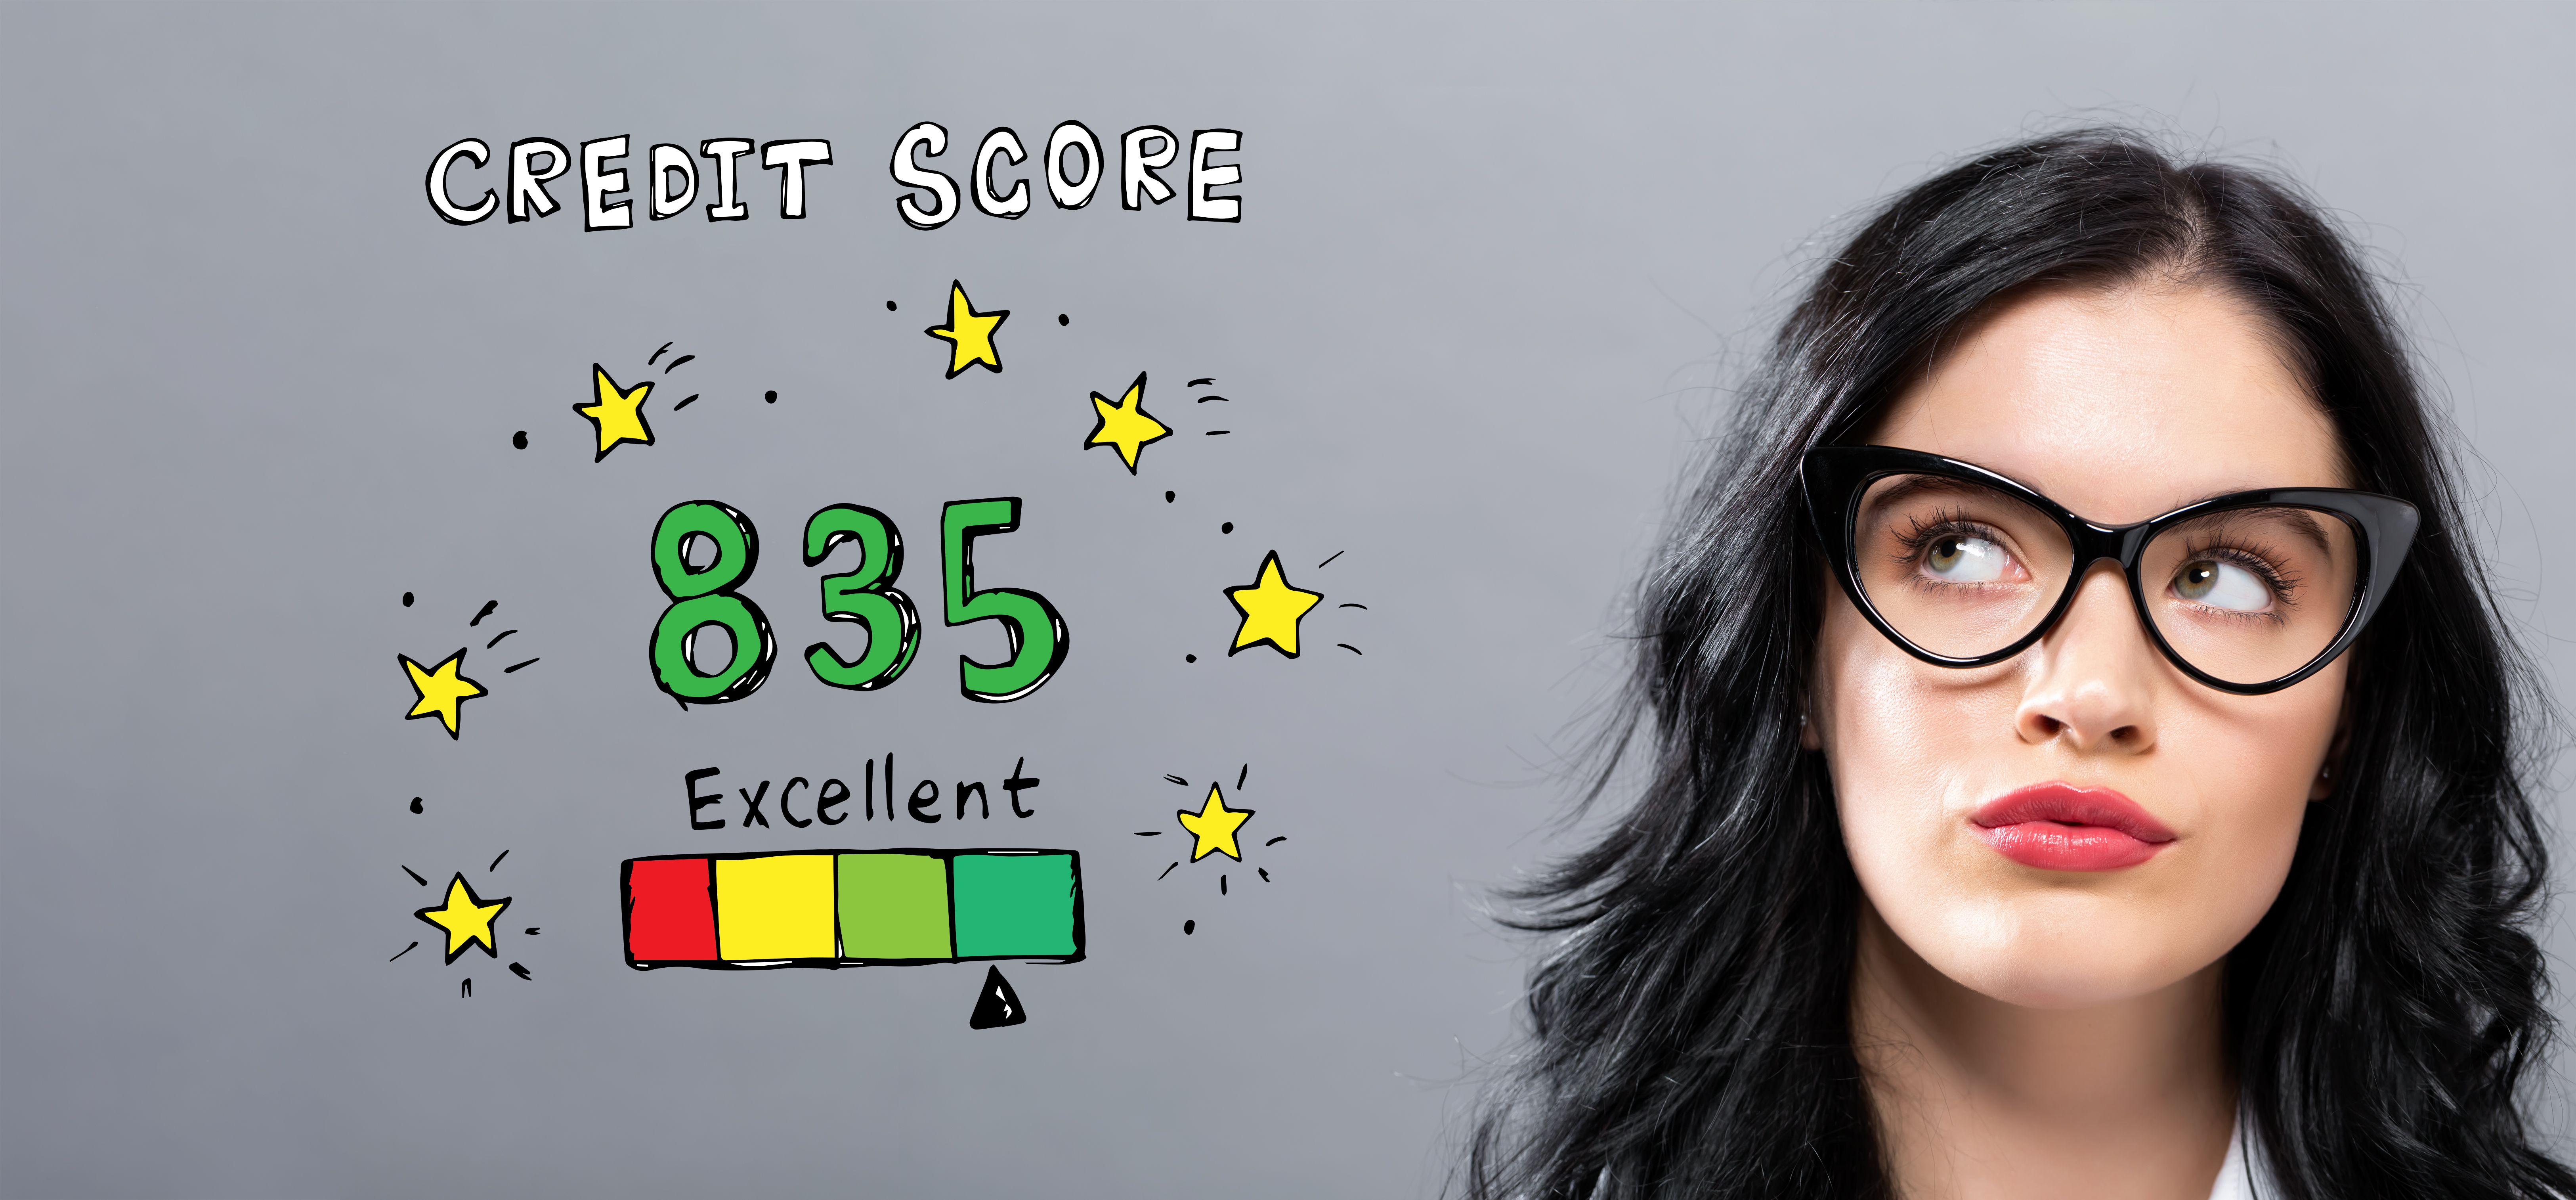 Young woman with excellent credit score